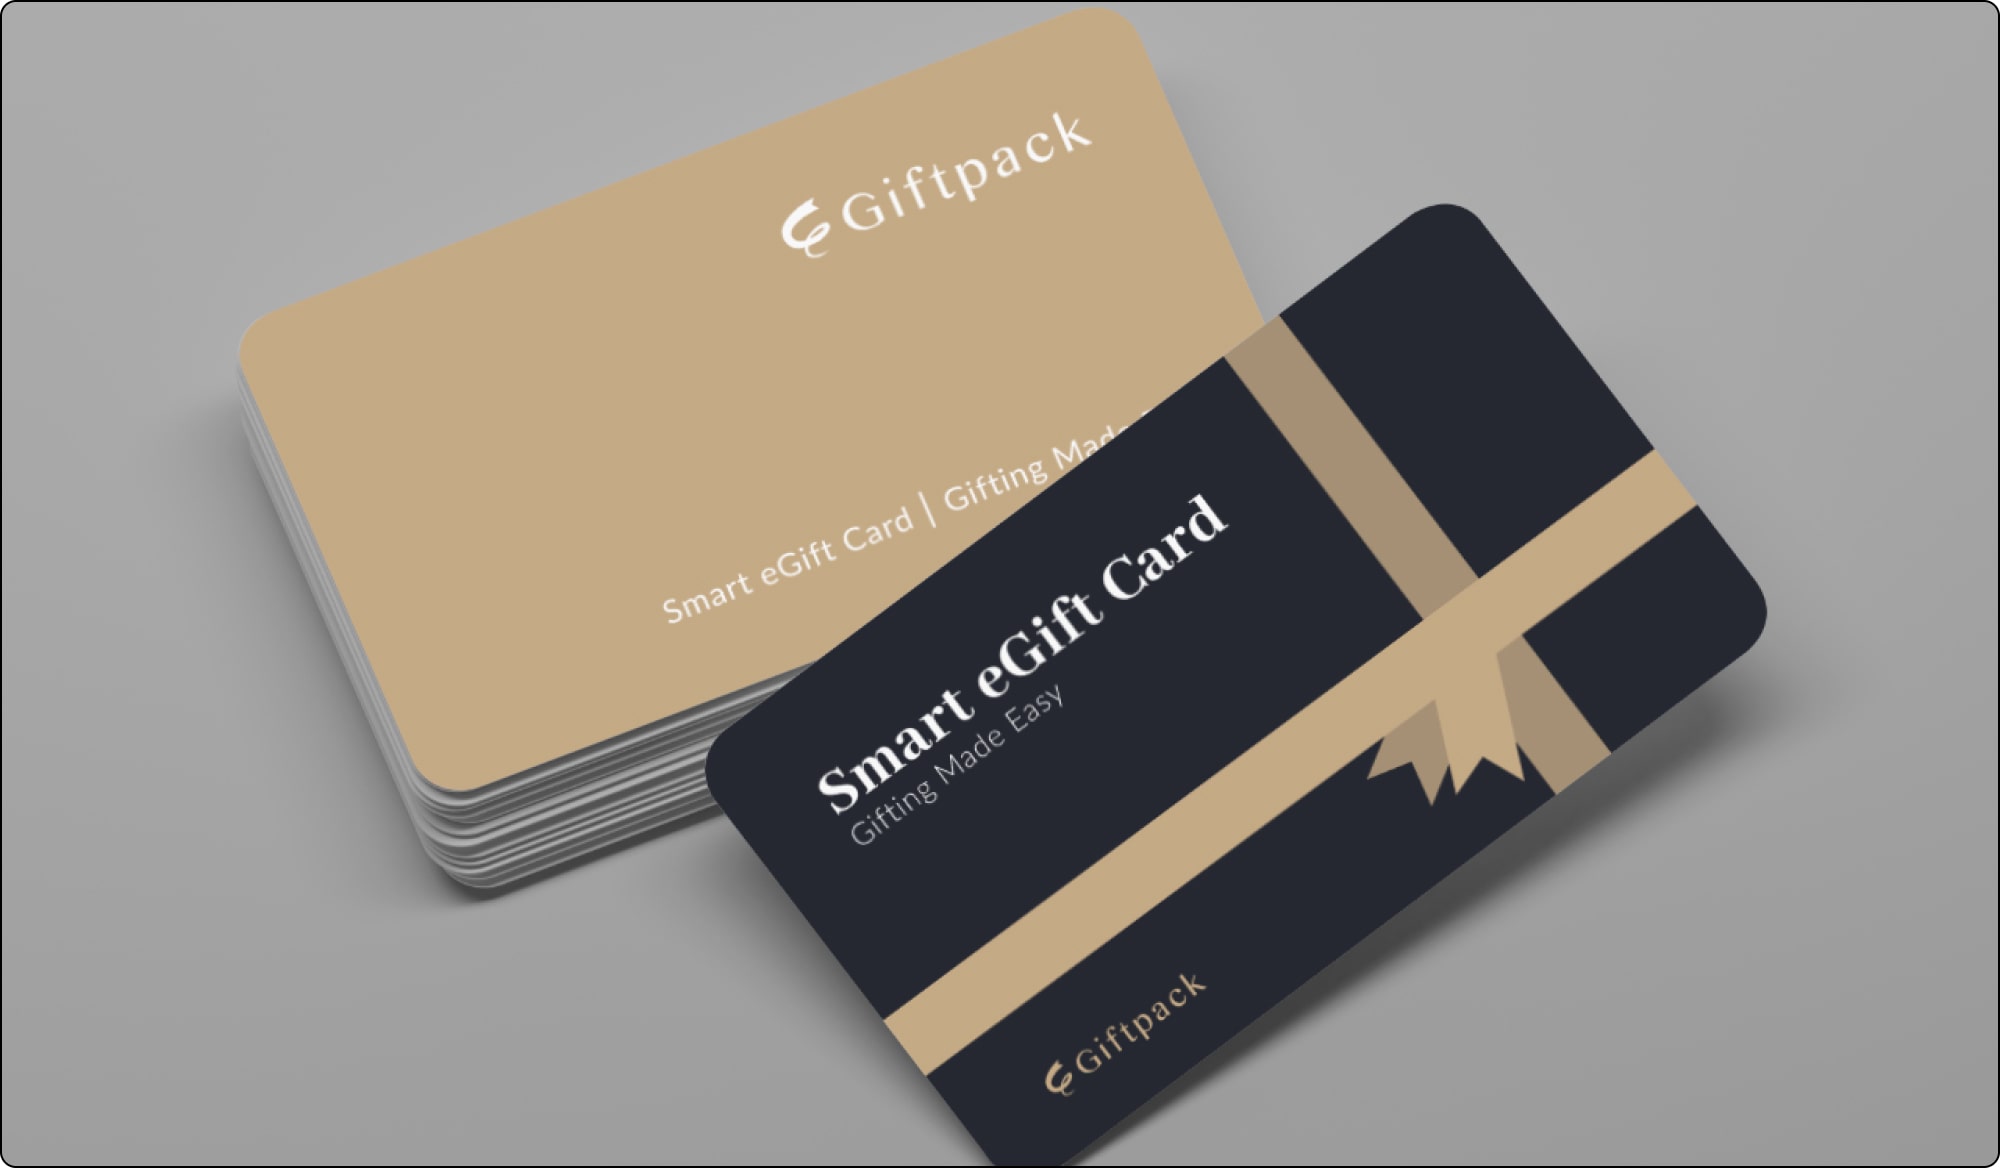 giftpack smart egift card for 350 brands for employee recognition gifts for years of service